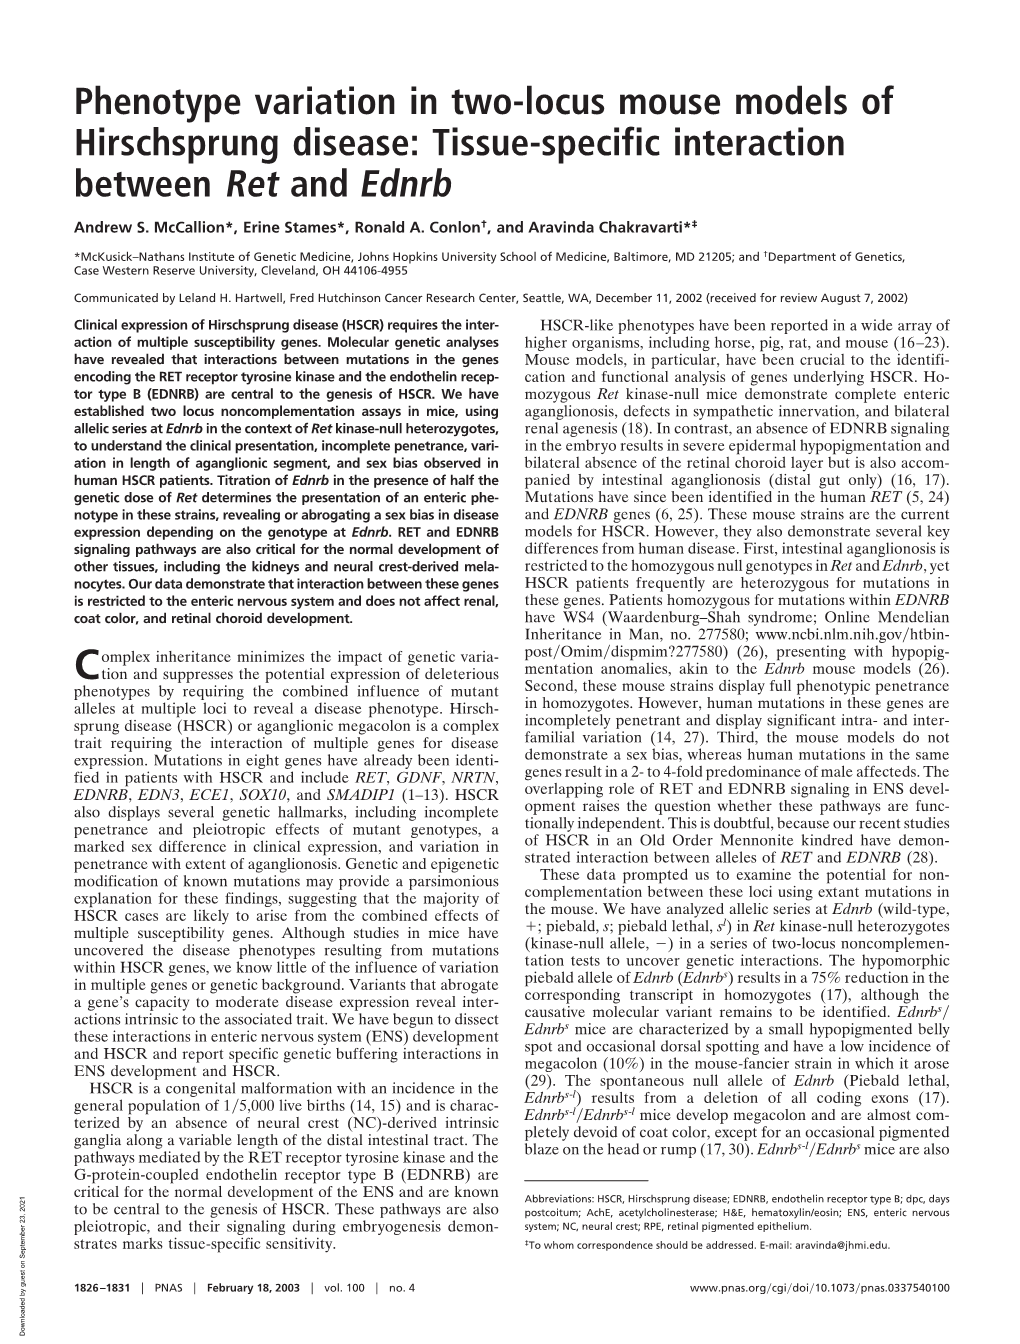 Tissue-Specific Interaction Between Ret and Ednrb